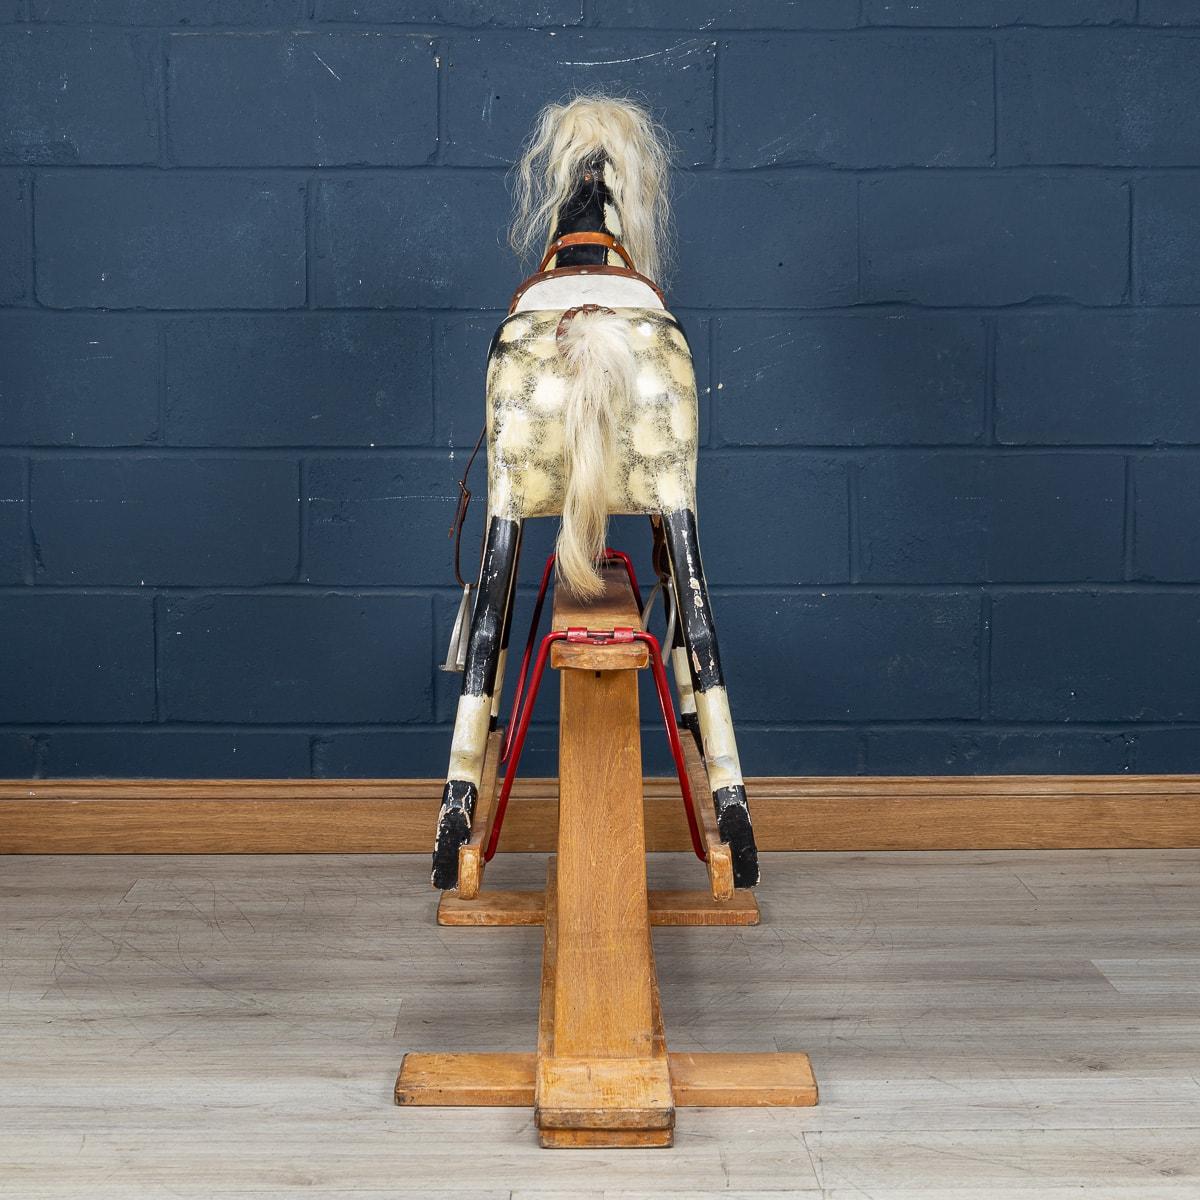 British 20th Century Wooden Childs Rocking Horse By Collinson, England c.1930 For Sale